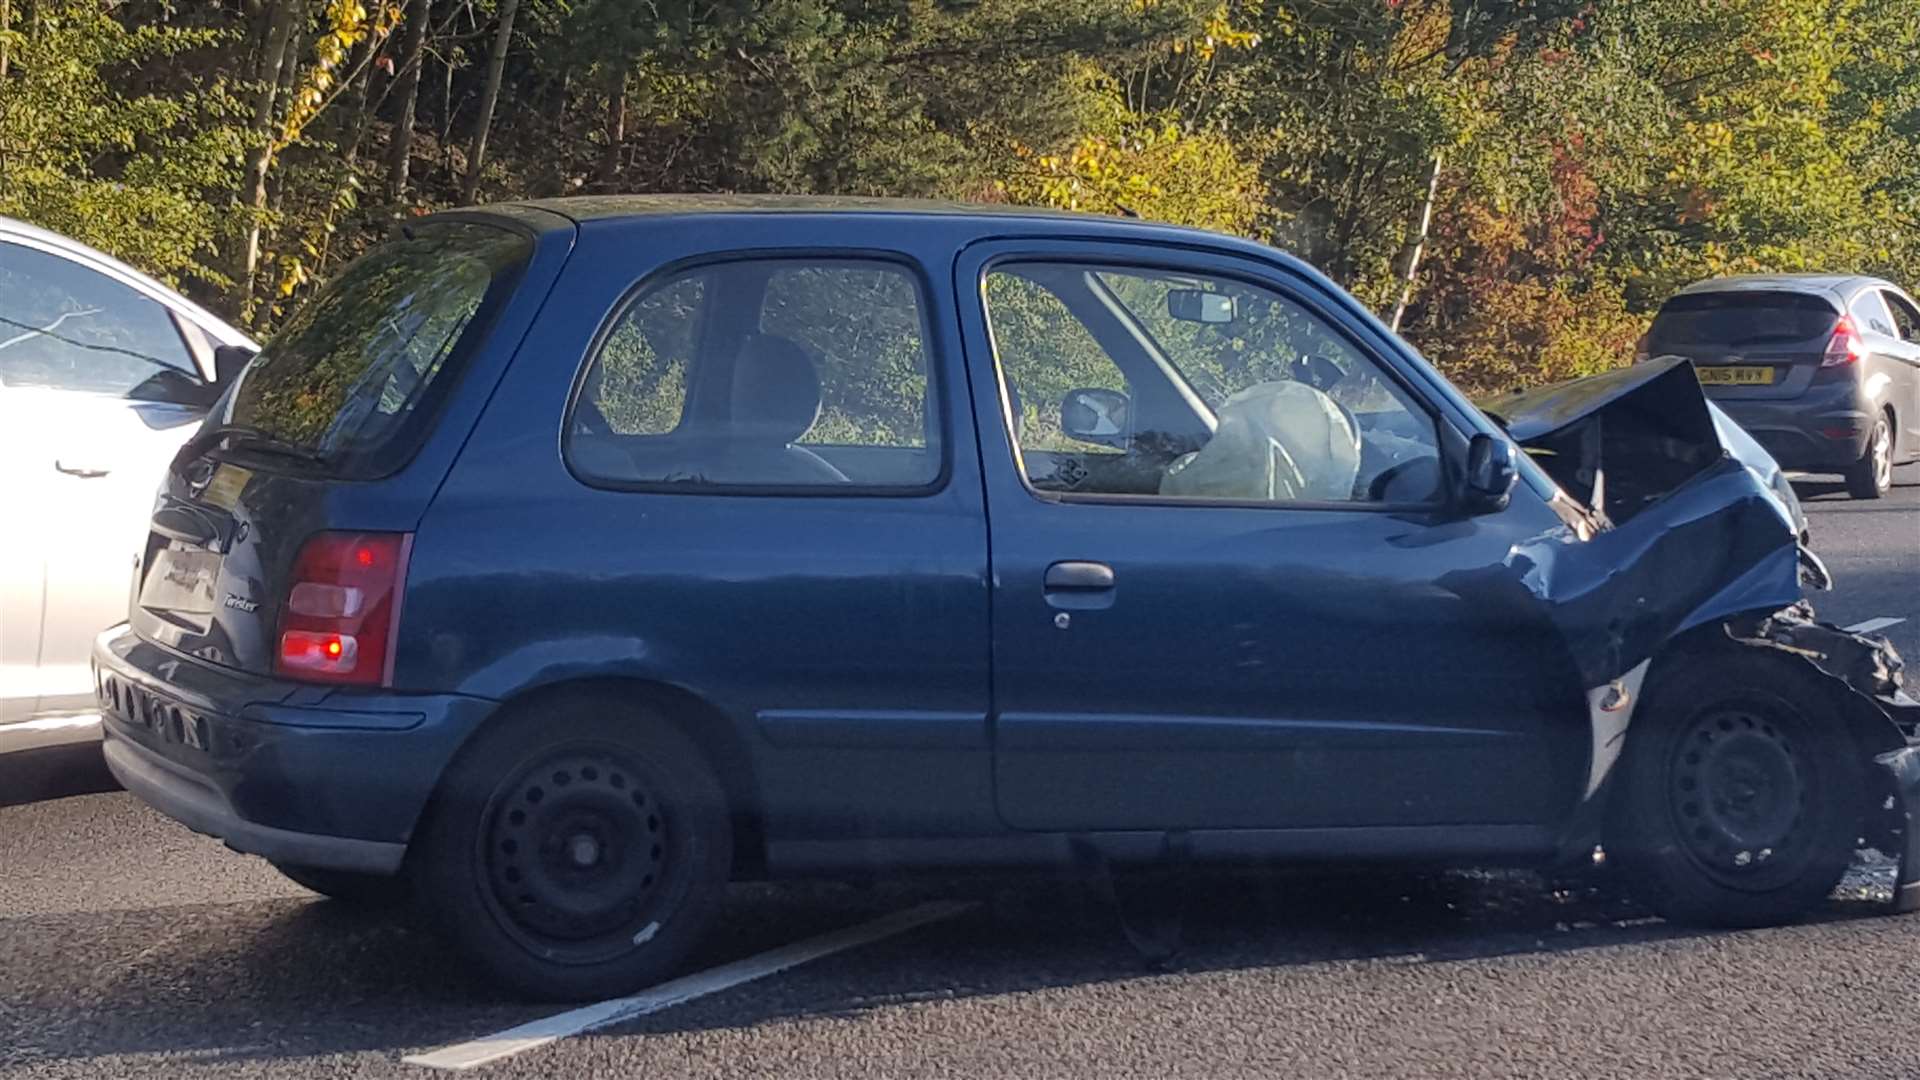 The Nissan Micra involved in the crash